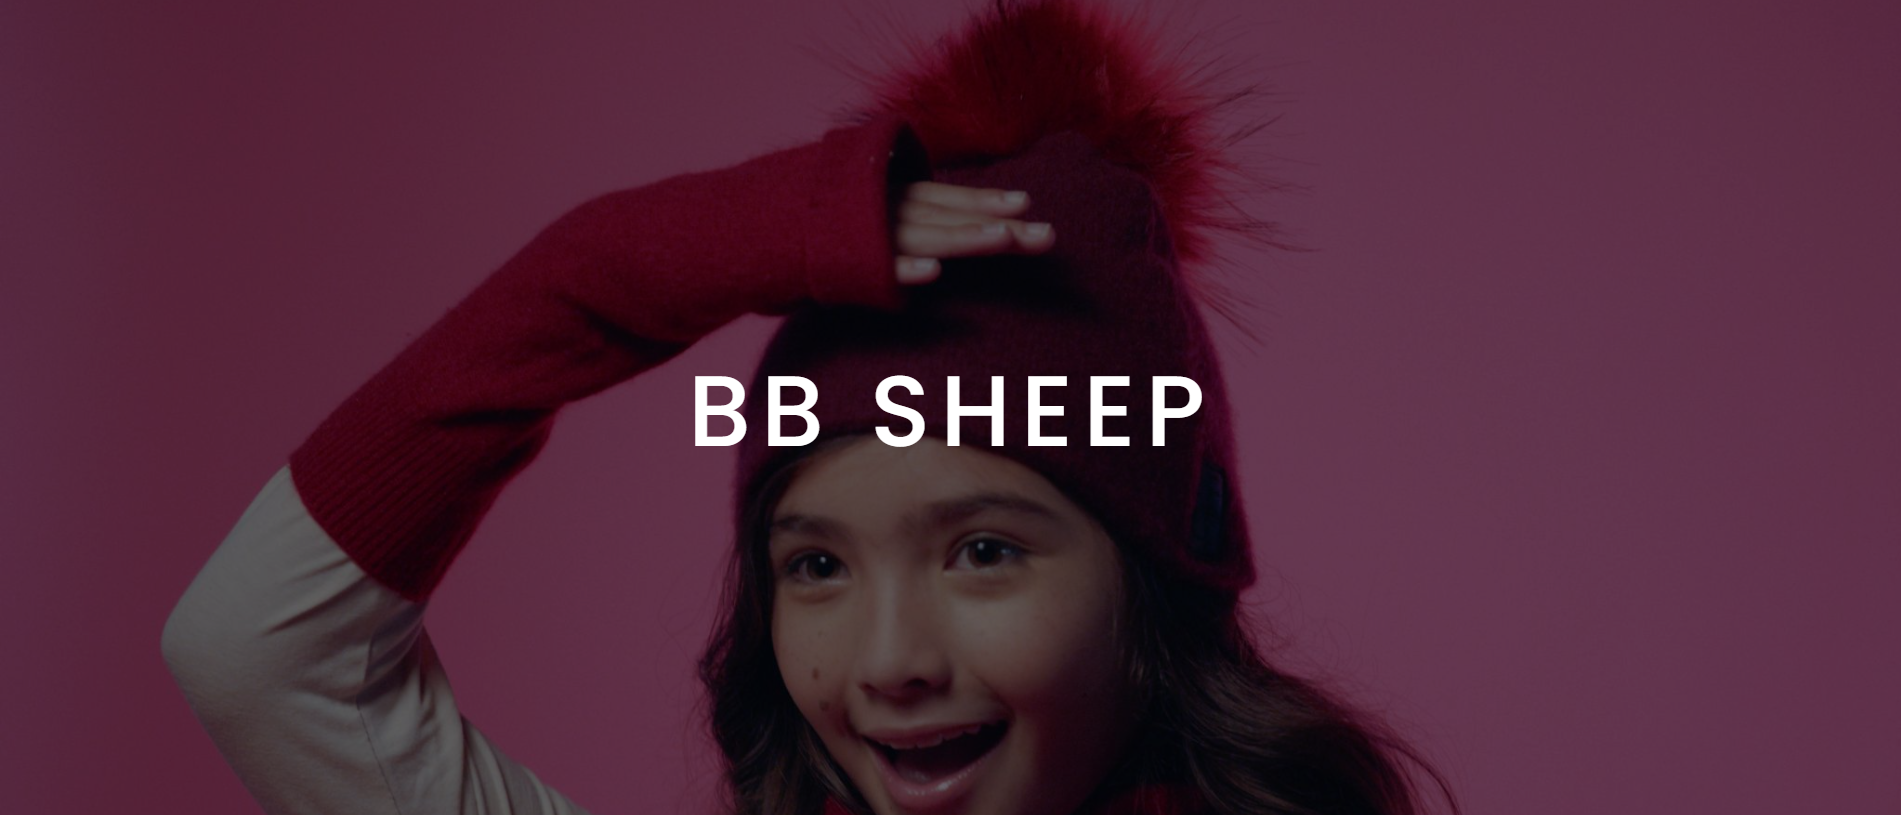 IU White BB Sheep logo on dimmed background of girl model wearing red head band and hand sleeves on pink background Featured Image